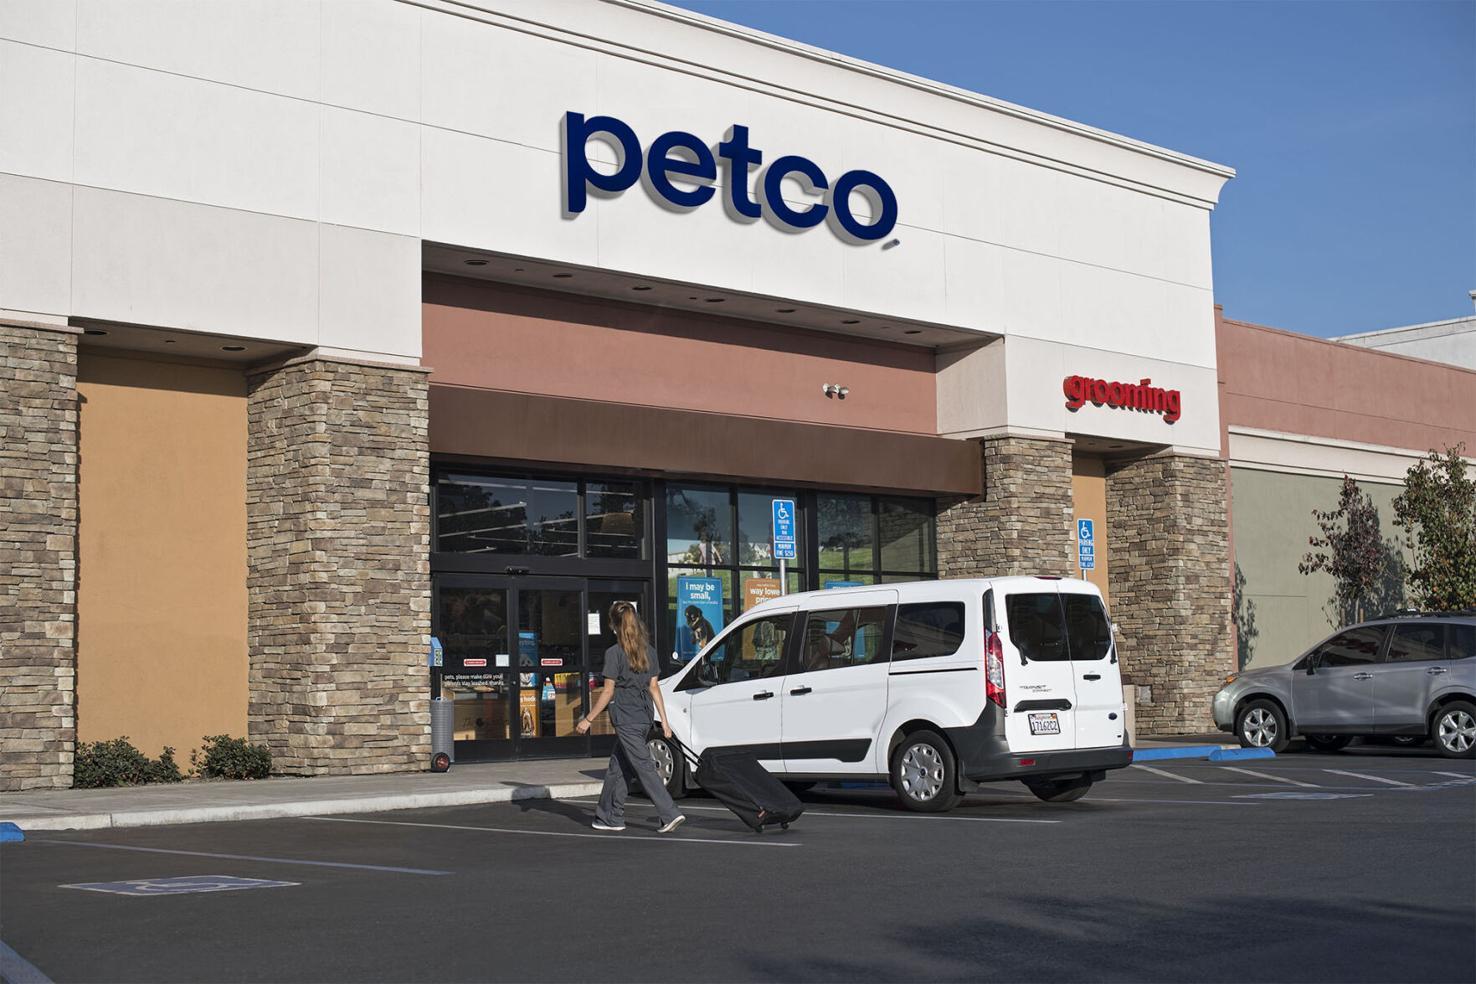 How Petco Is Catering to Pet Owners’ Changing Buying Habits